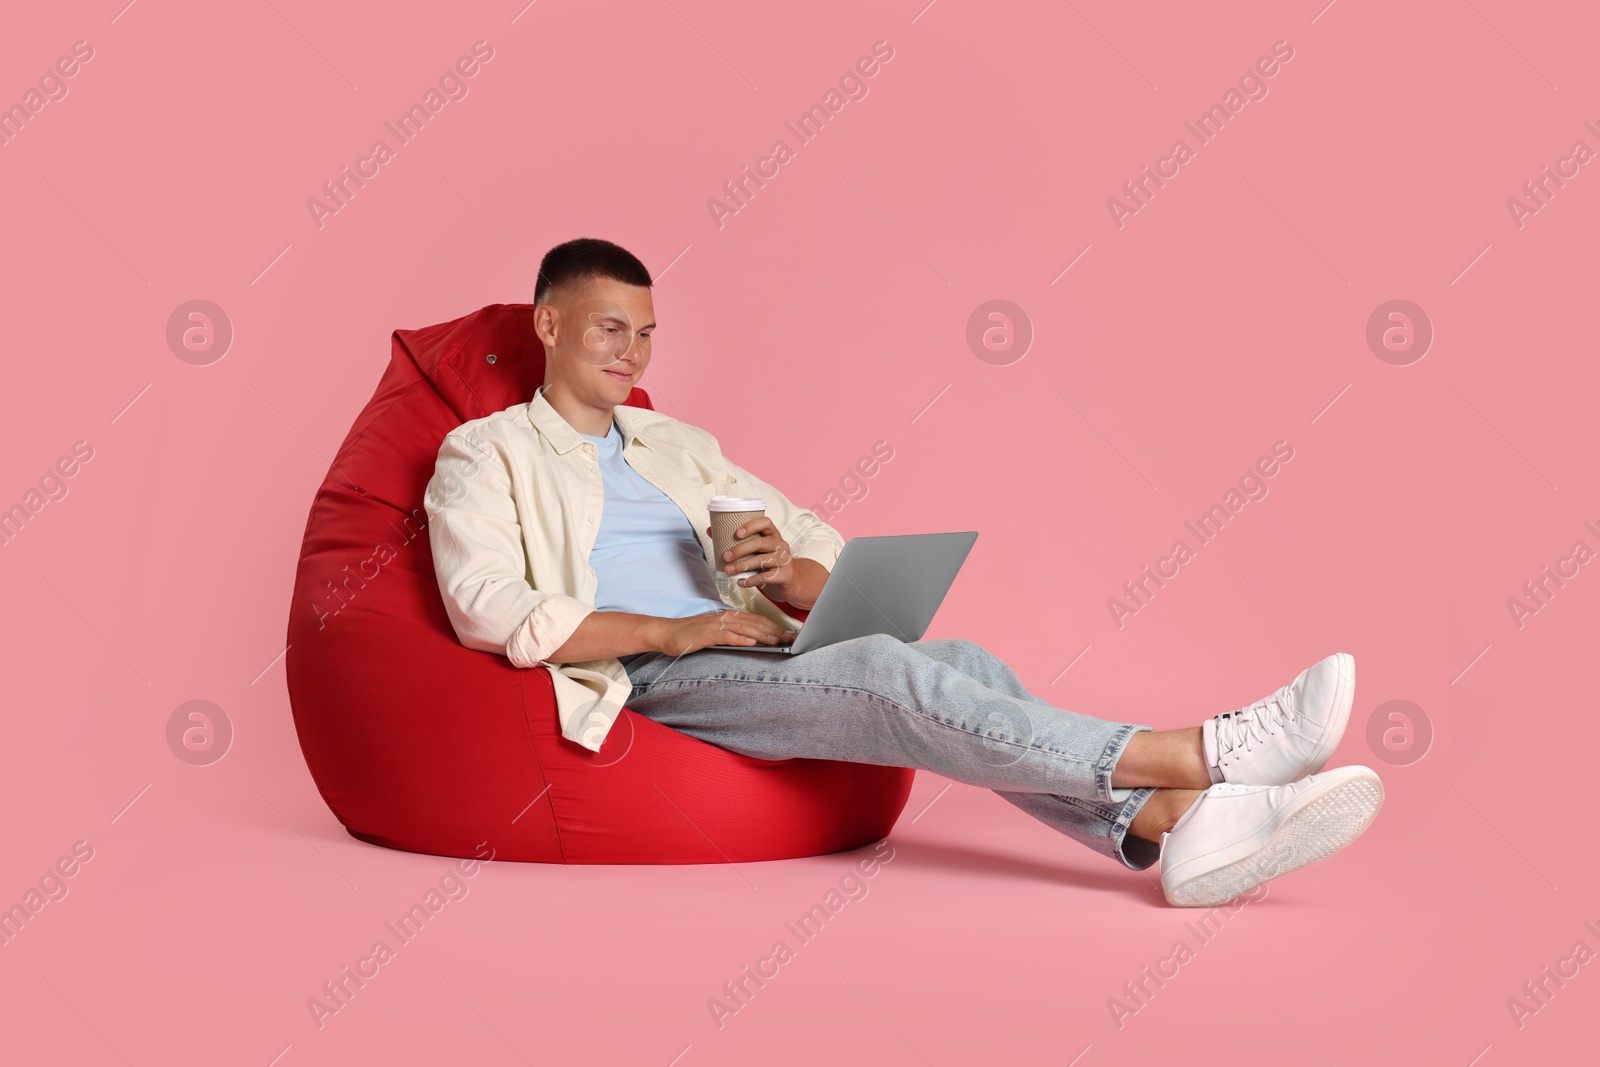 Photo of Handsome man with laptop and paper cup on red bean bag chair against pink background